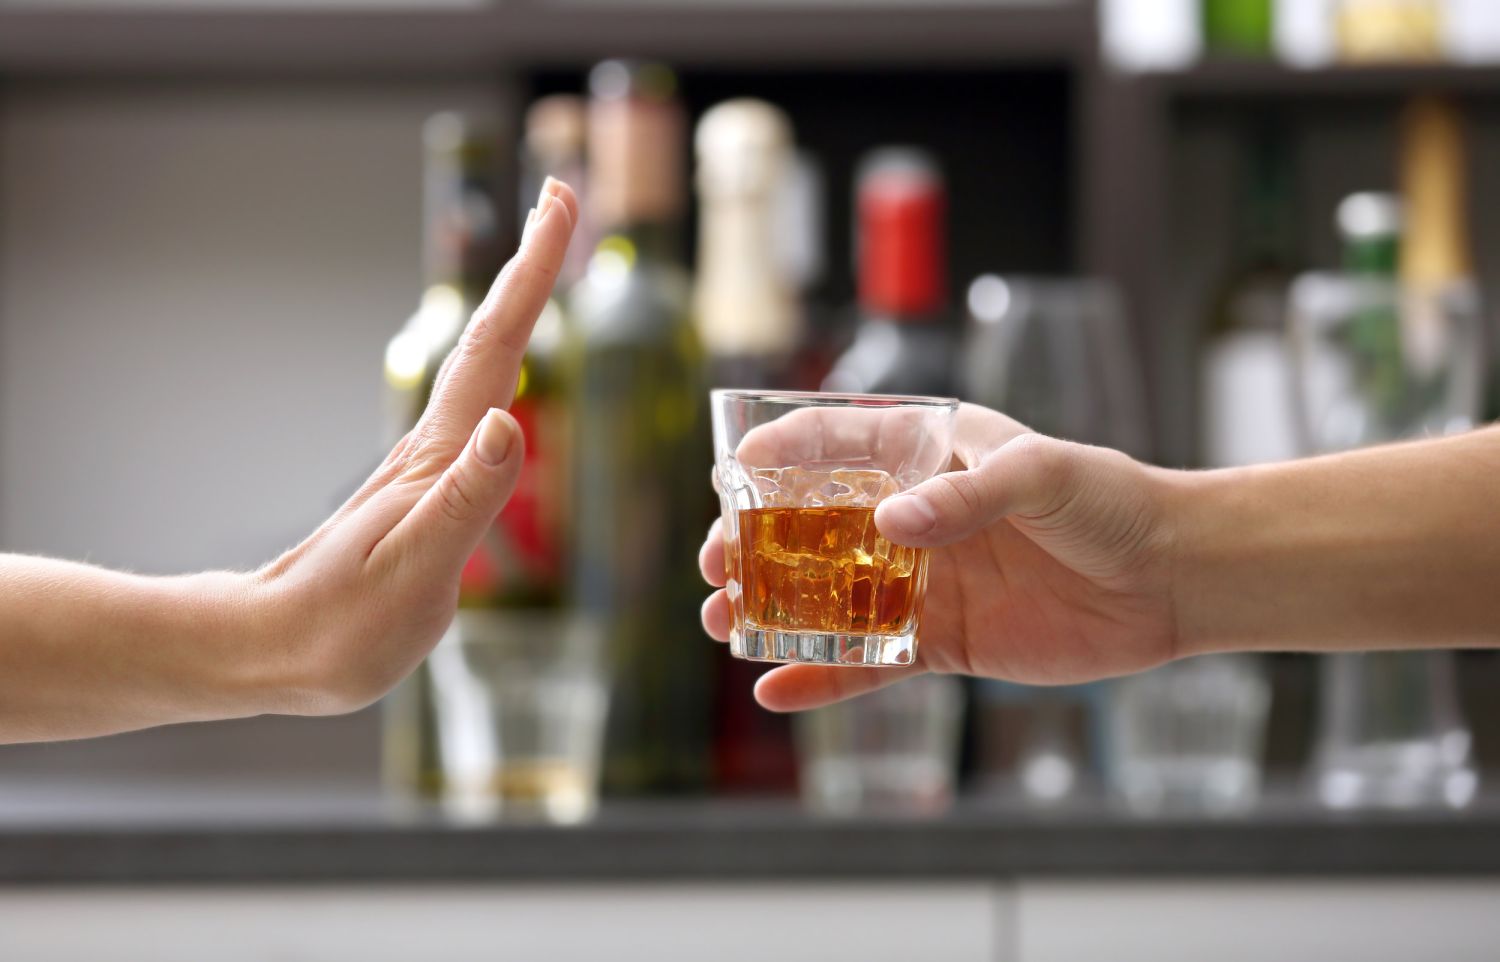 Excessive alcohol consumption affects the cardiovascular system